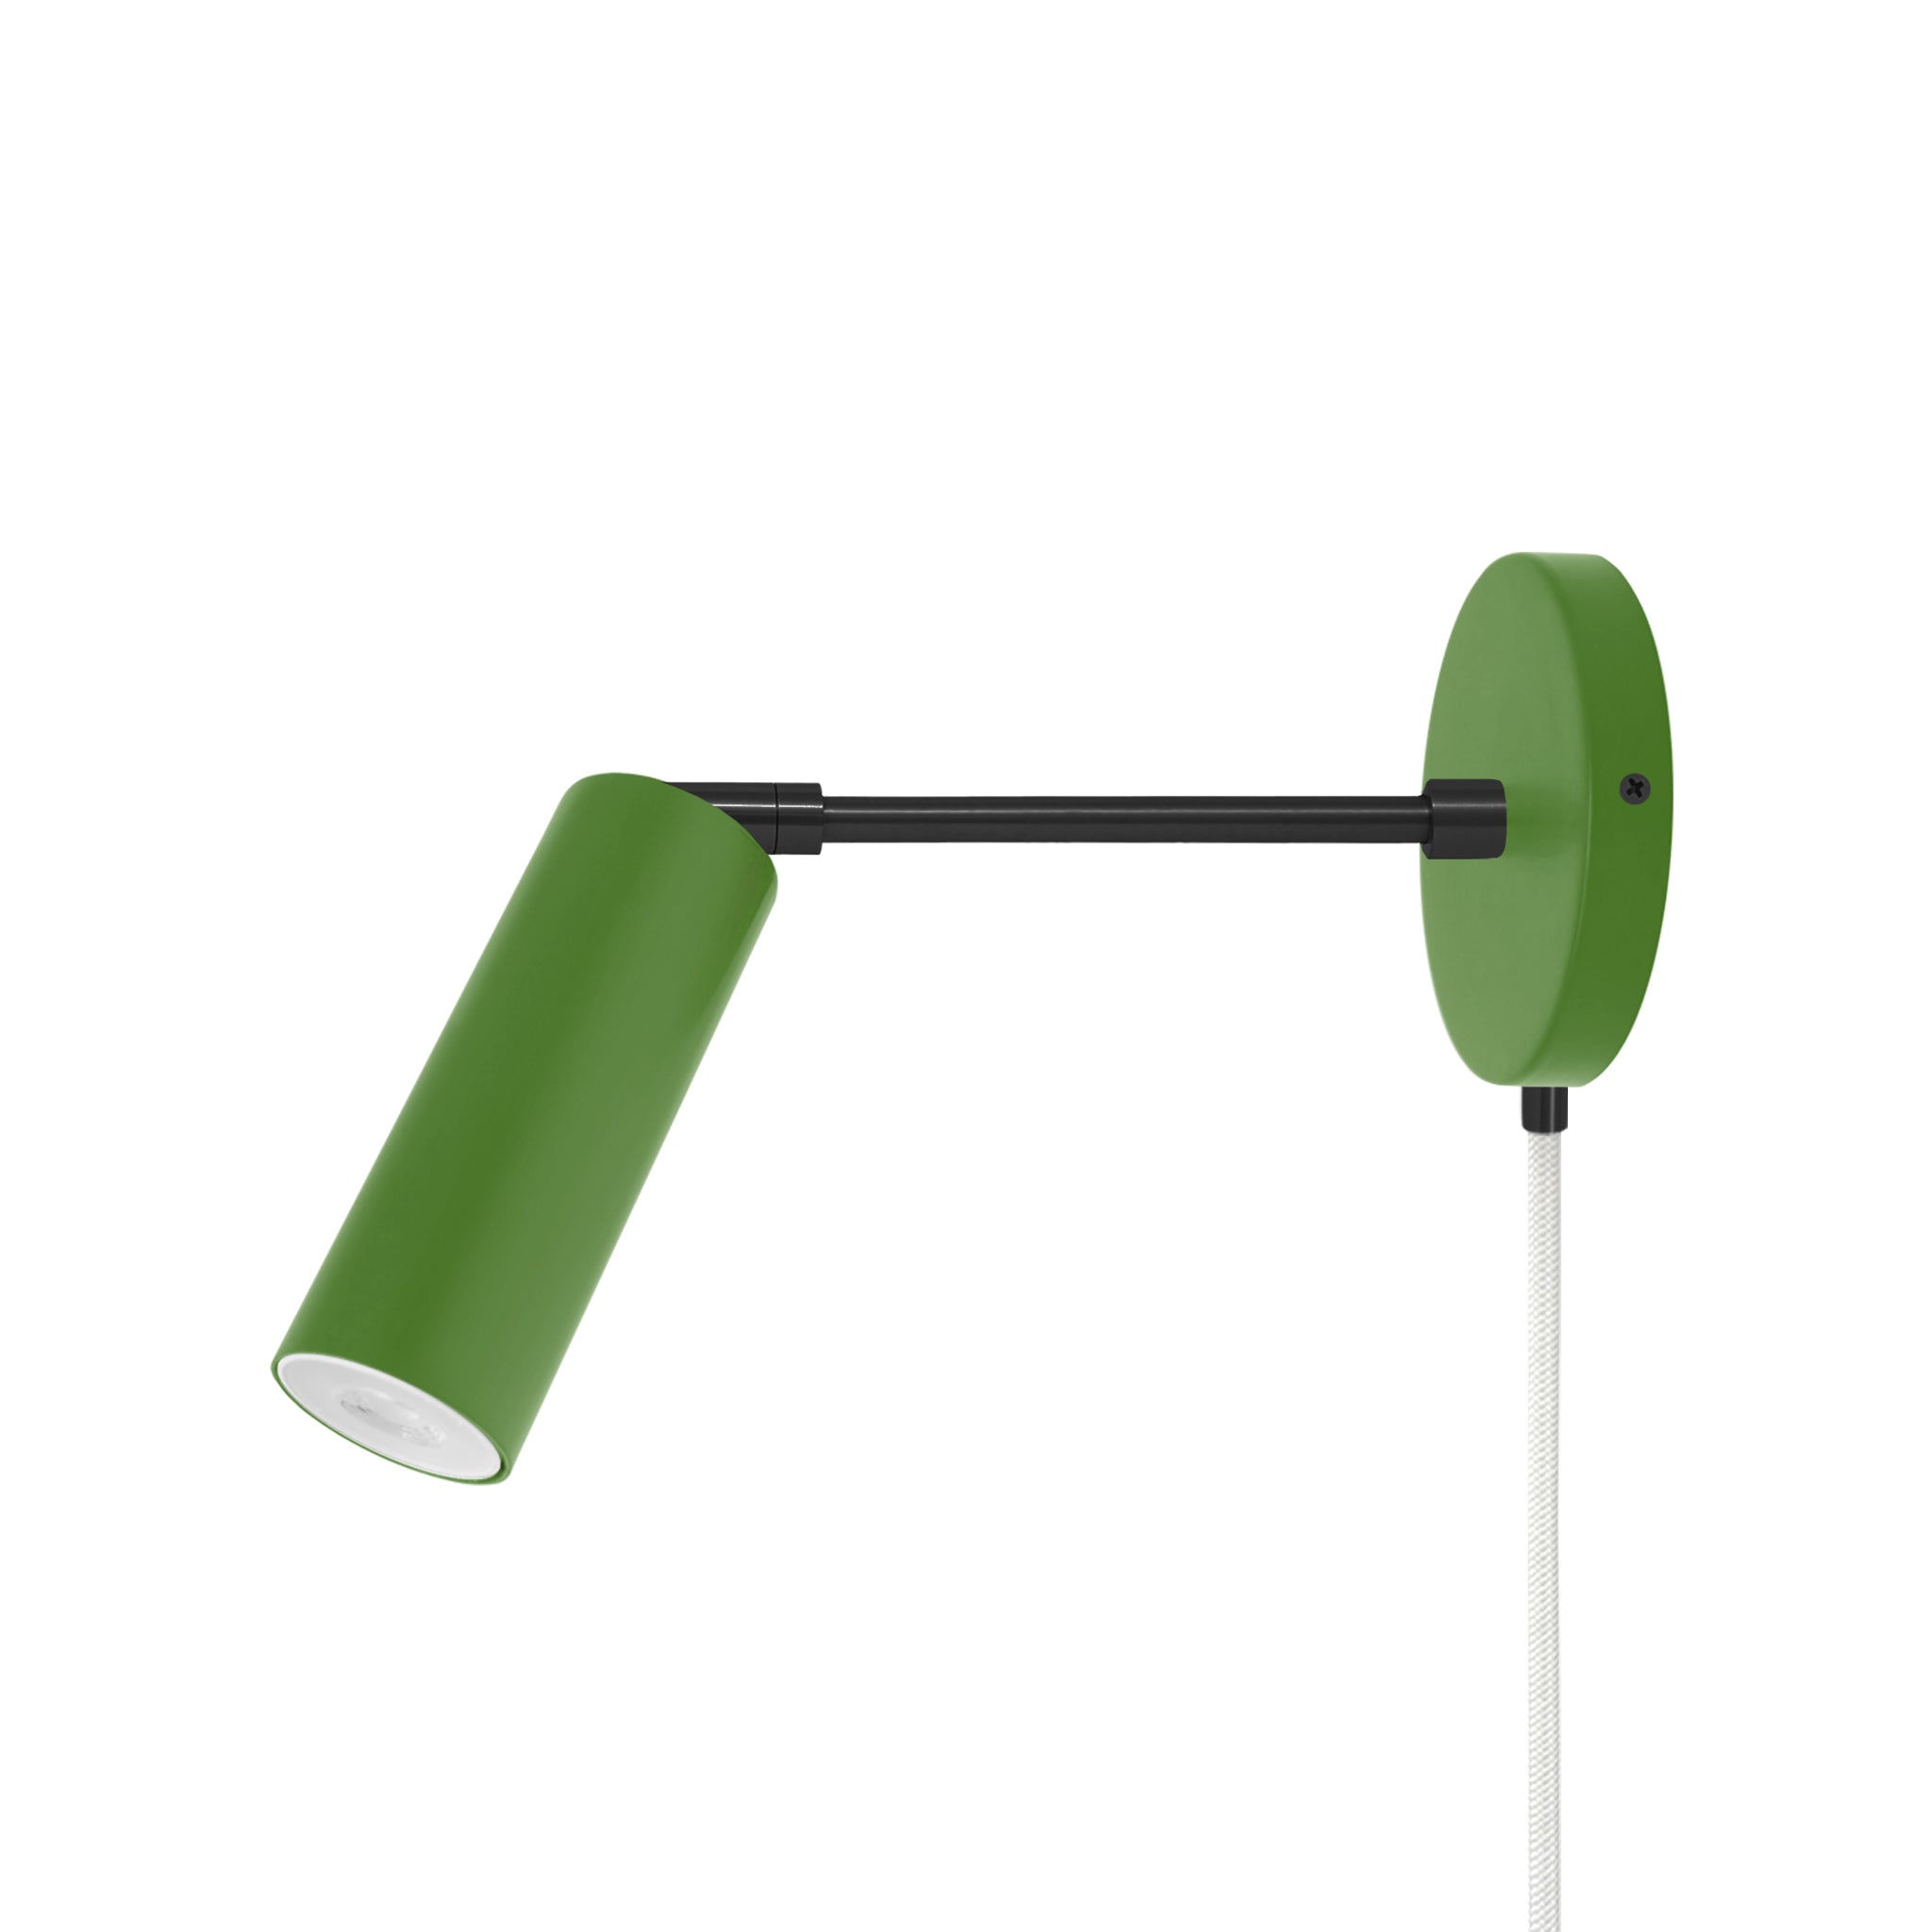 Black and python green color Reader plug-in sconce 6" arm Dutton Brown lighting